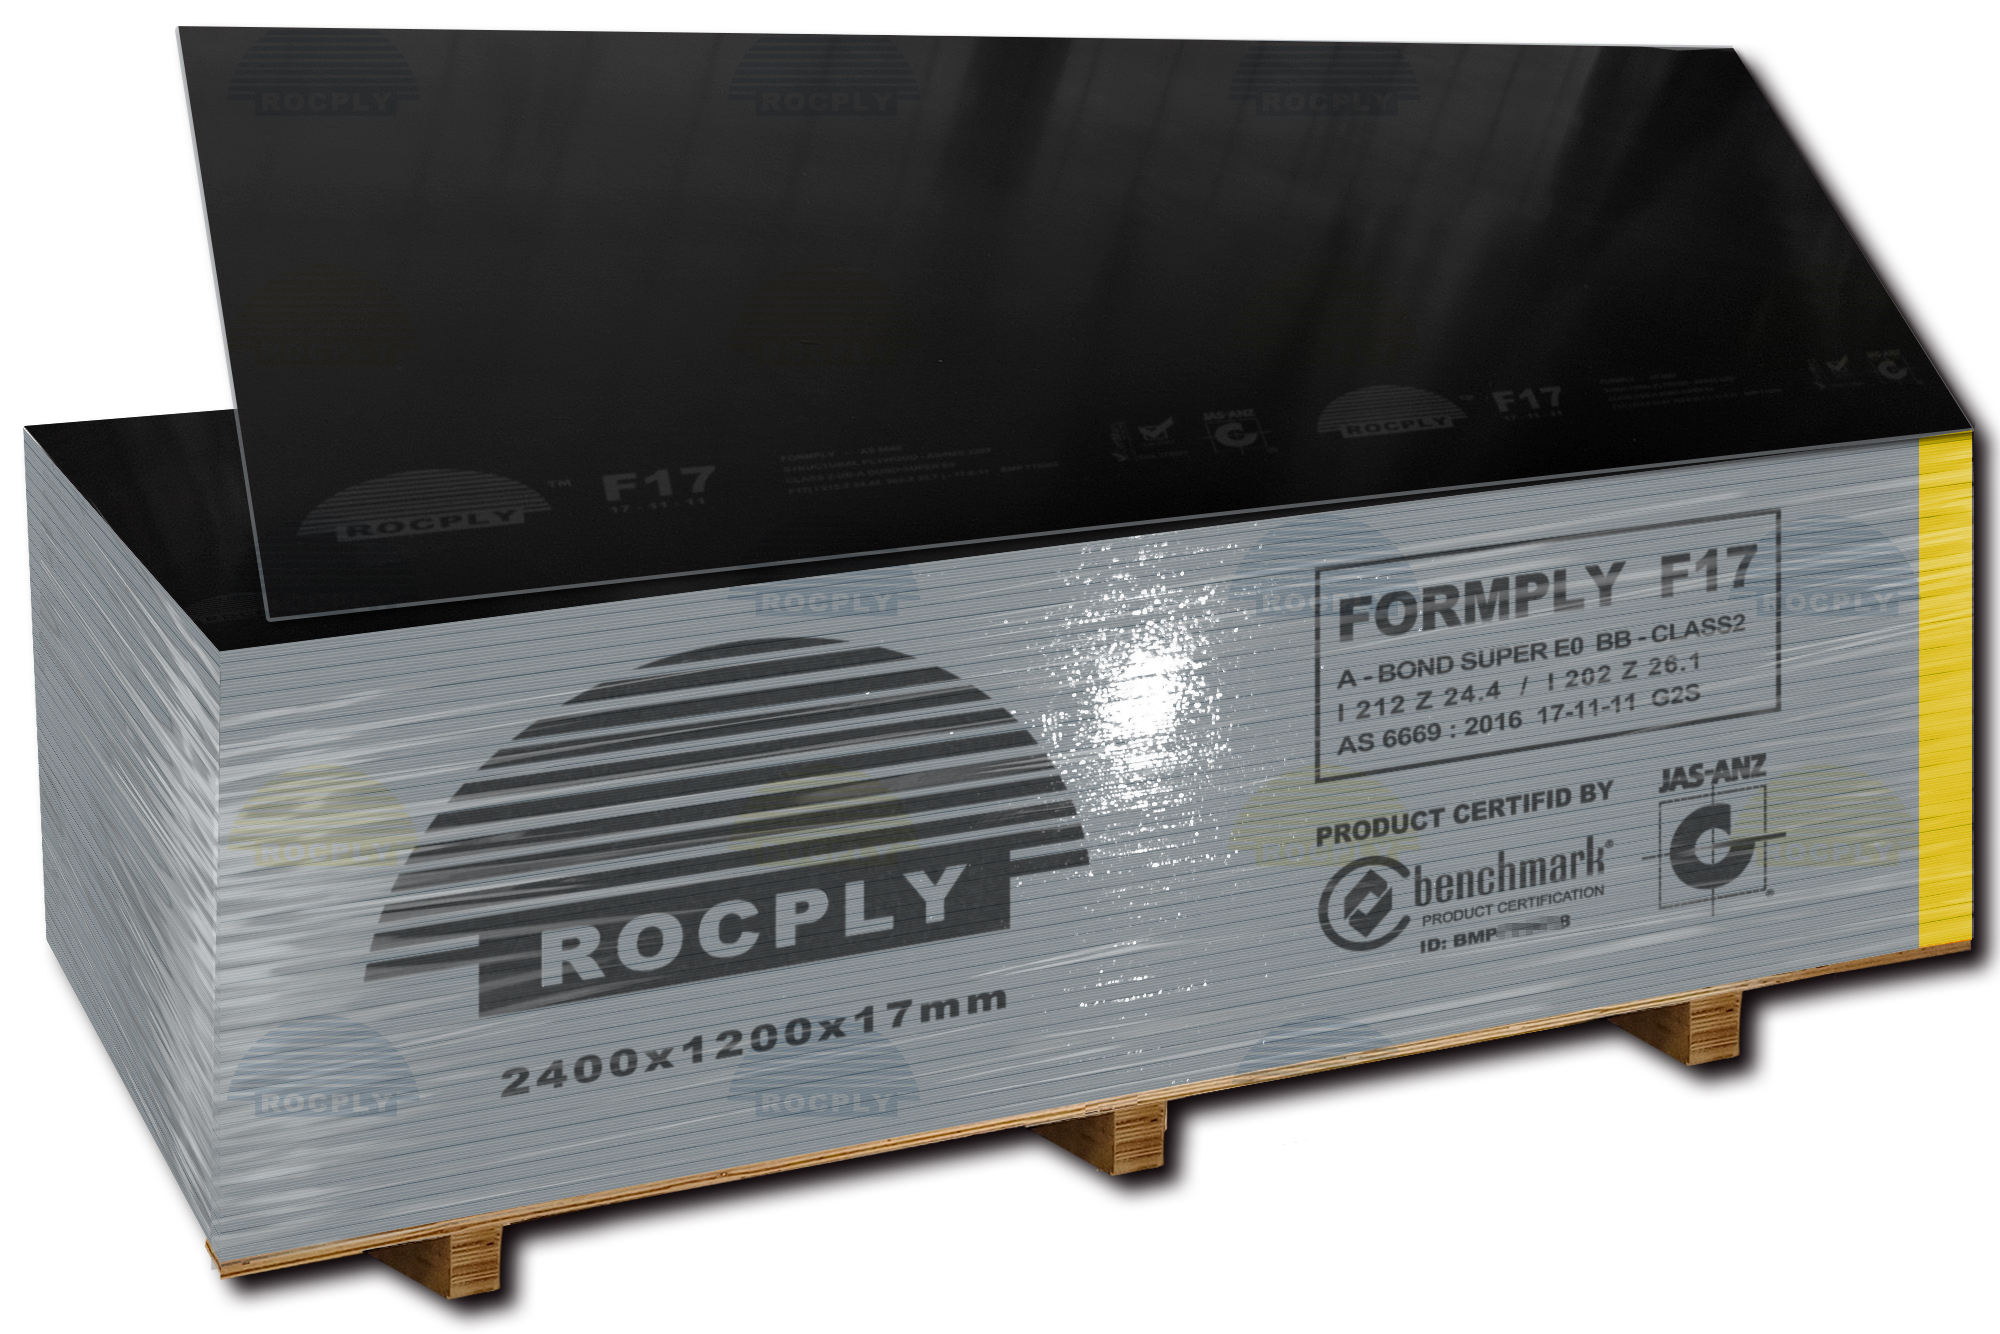 ROCPLY F17 Formply Is The Durable and Versatile Choice for Your Construction Needs